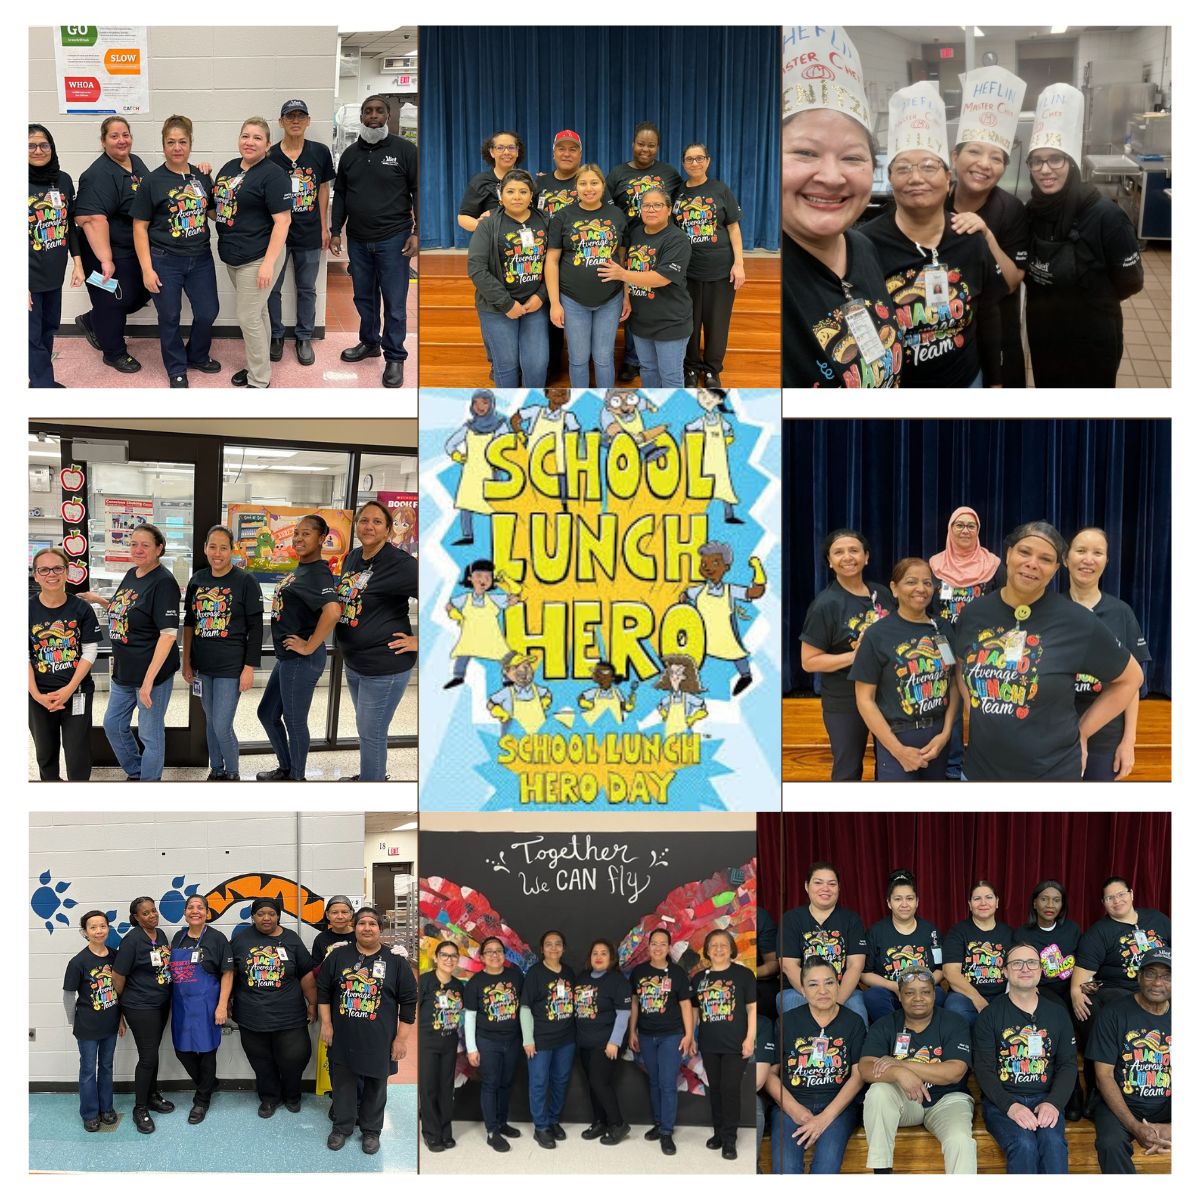 Thank you to EVERYONE who celebrated our heroes for School Lunch Hero Day! We love our school lunch heroes. They work hard everyday fueling the minds and bodies of Alief students. We have the best in the business and so happy they felt the love they deserve! ❤️ #aliefproud